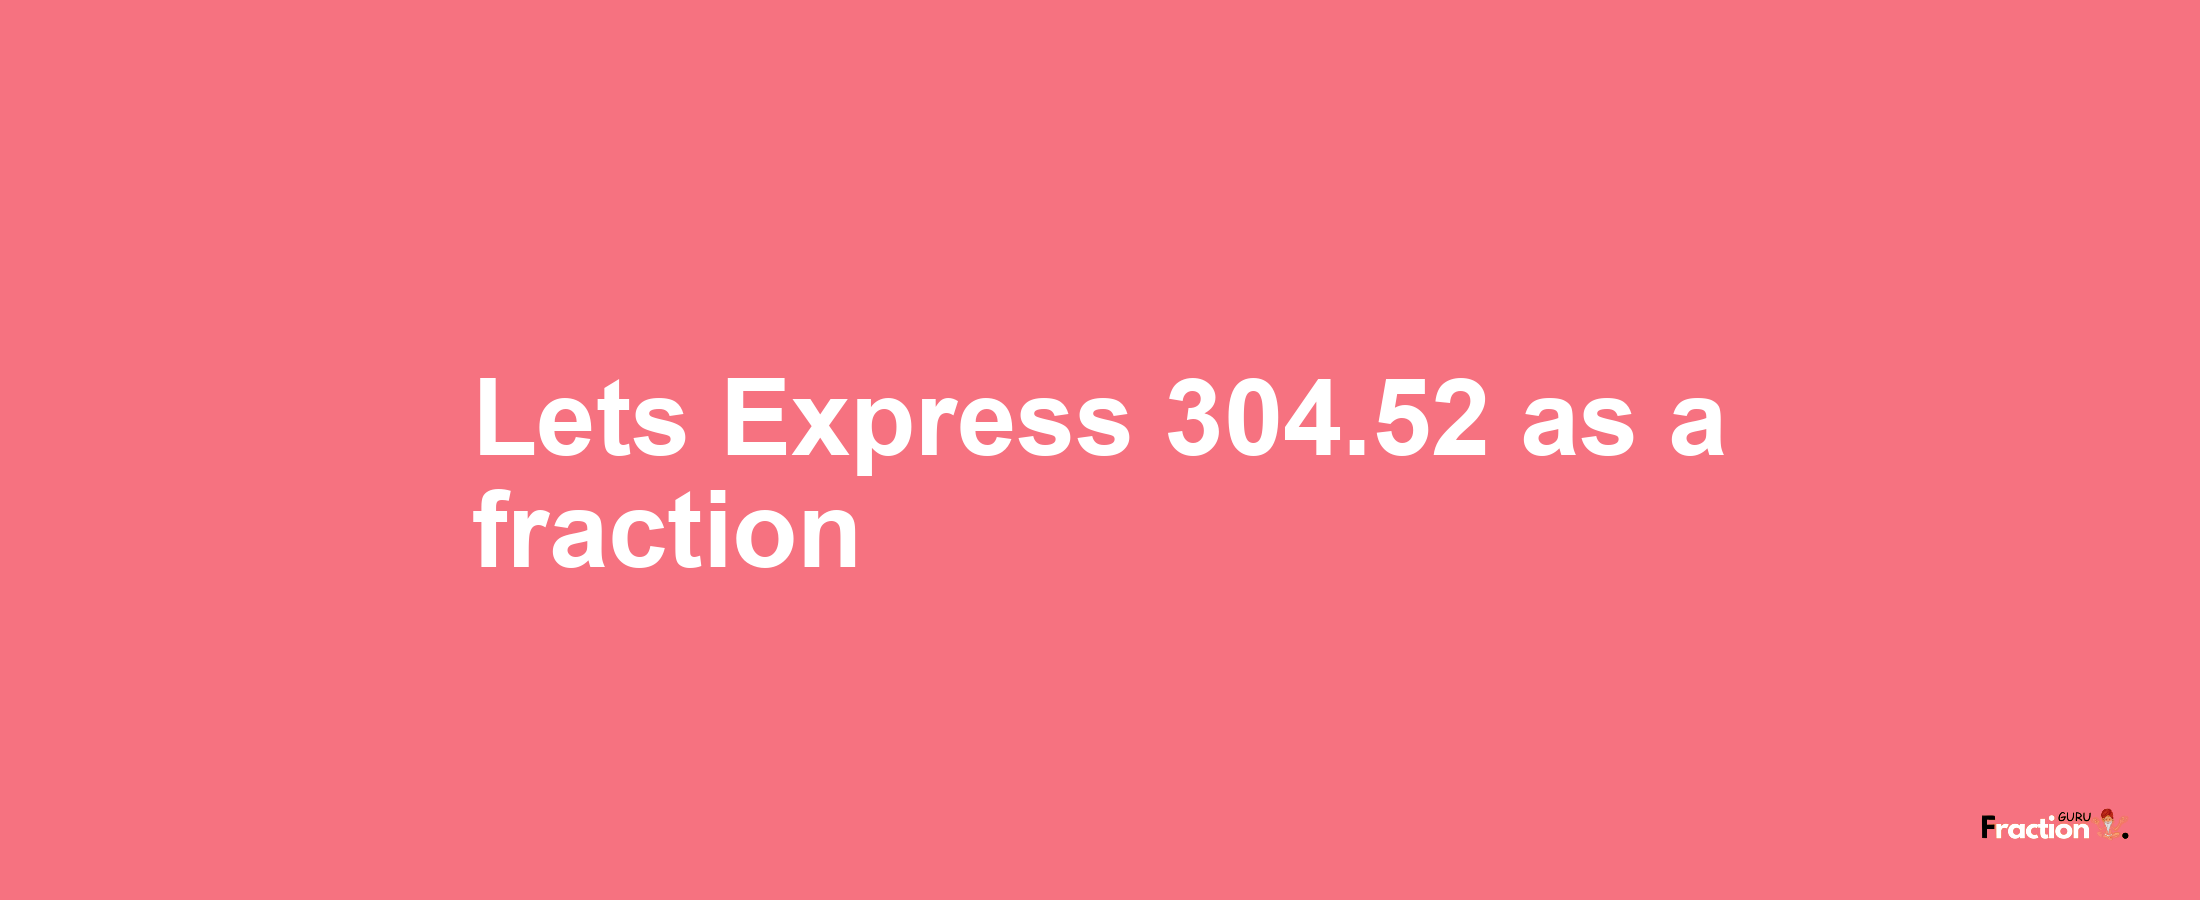 Lets Express 304.52 as afraction